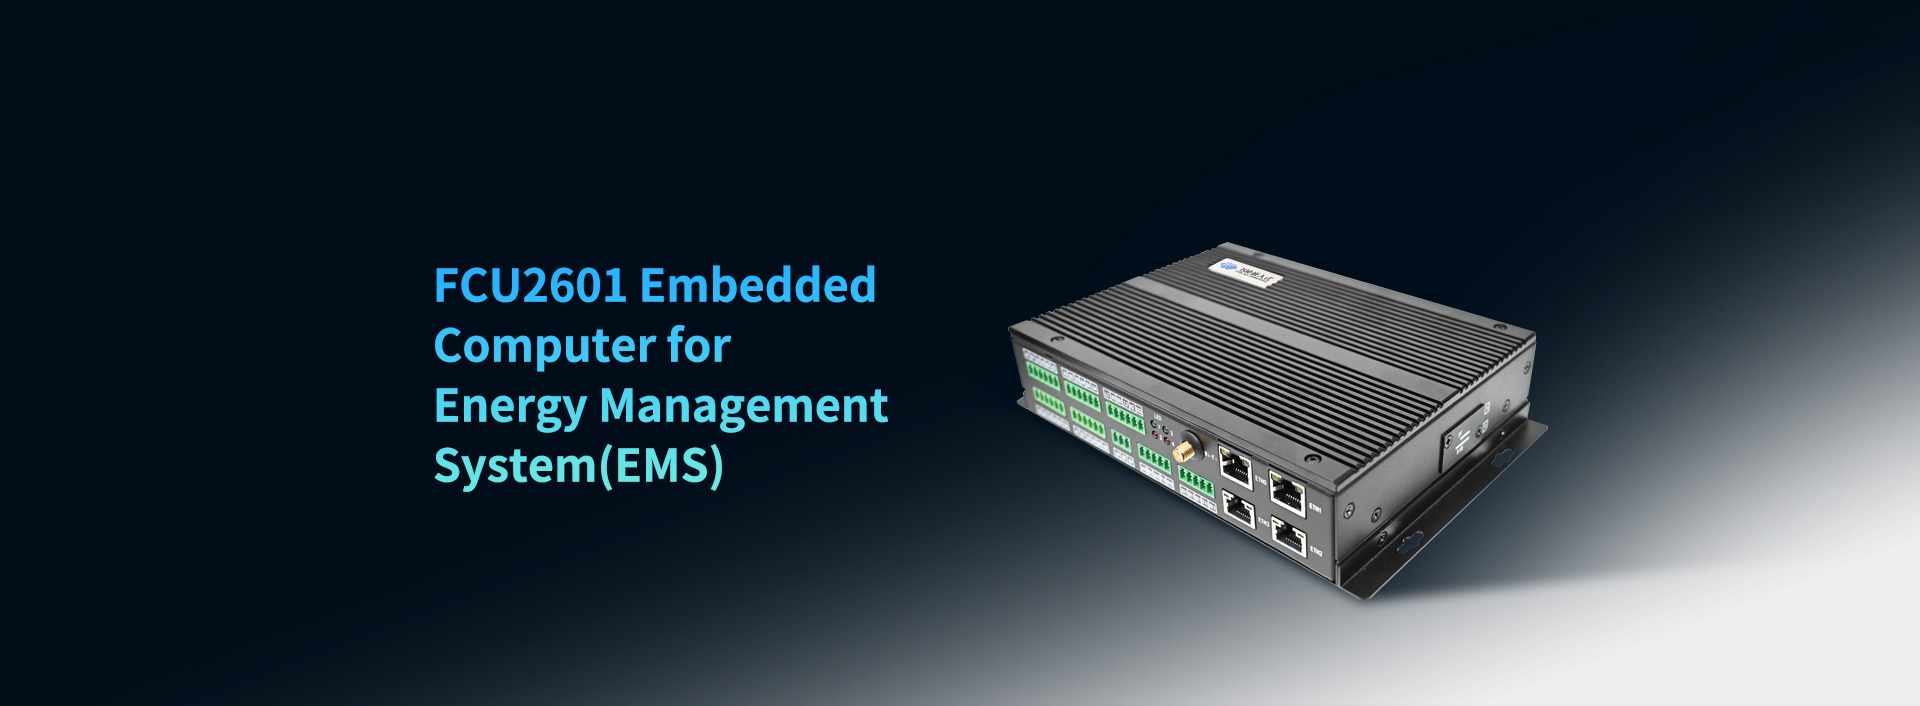 Embedded System Selection for Energy Management System FCU2601 embedded Control Units